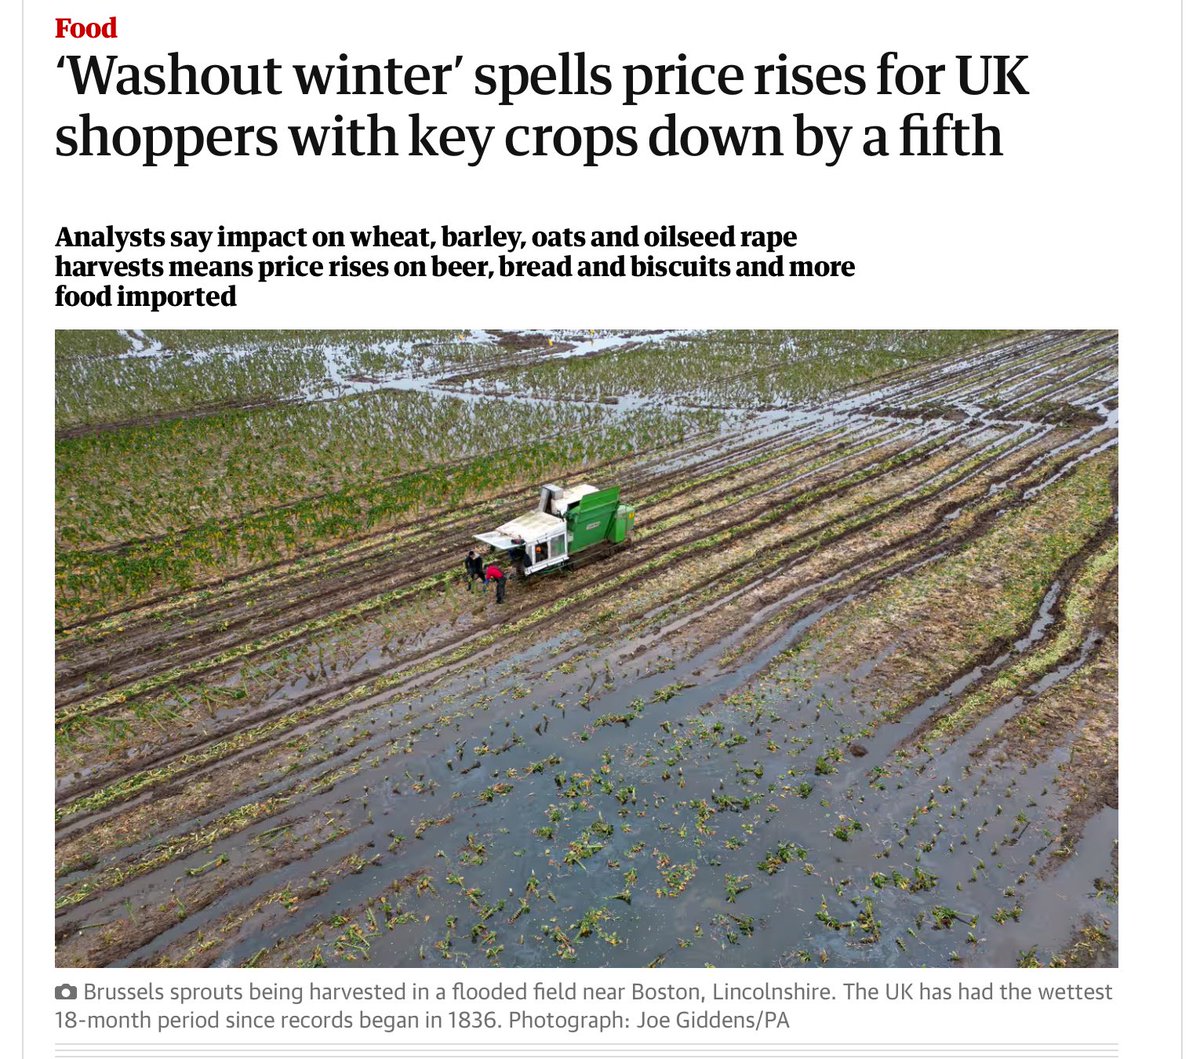 ‘Washout winter’ spells price rises for UK shoppers with key crops down by a fifth’ Farming can work with the future proofing, and diversifying of local food production with public money. How, by restoring nature, putting our trees back in to the right places, whilst improving